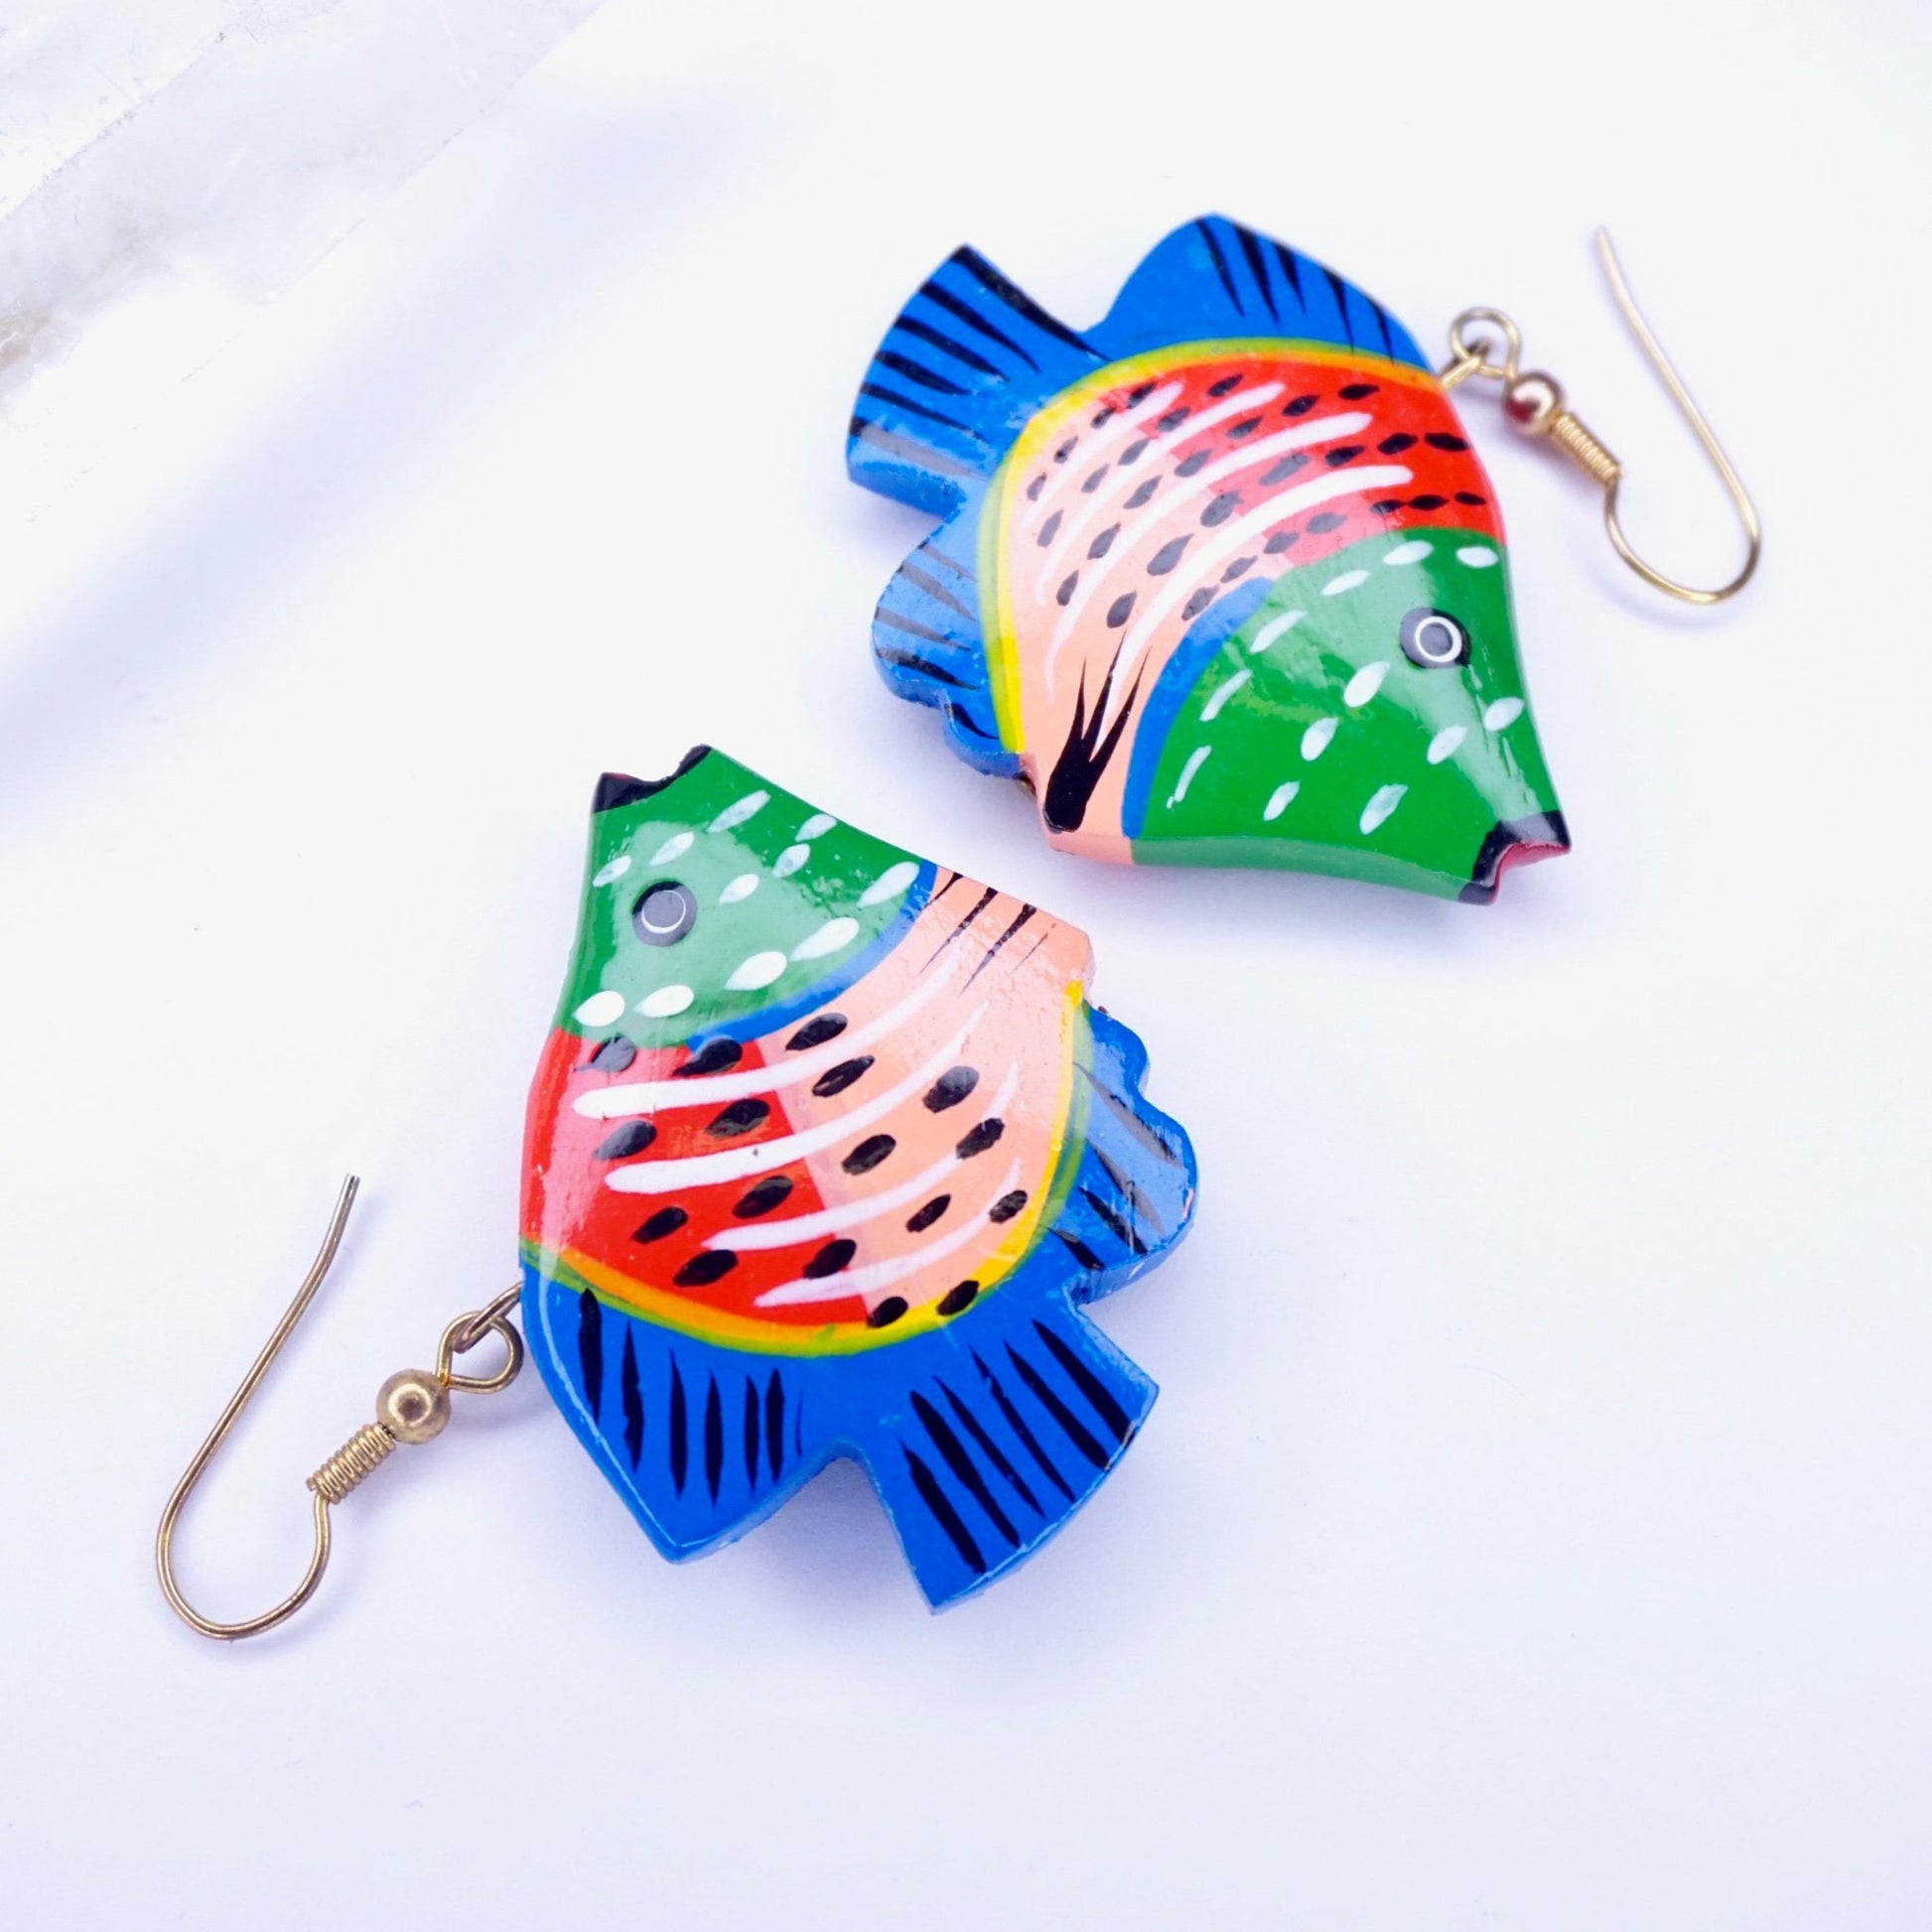 Vintage wood carved fish earrings, colorful painted wood dangle earrings with intricate detail, handmade wooden statement jewelry on a white background.